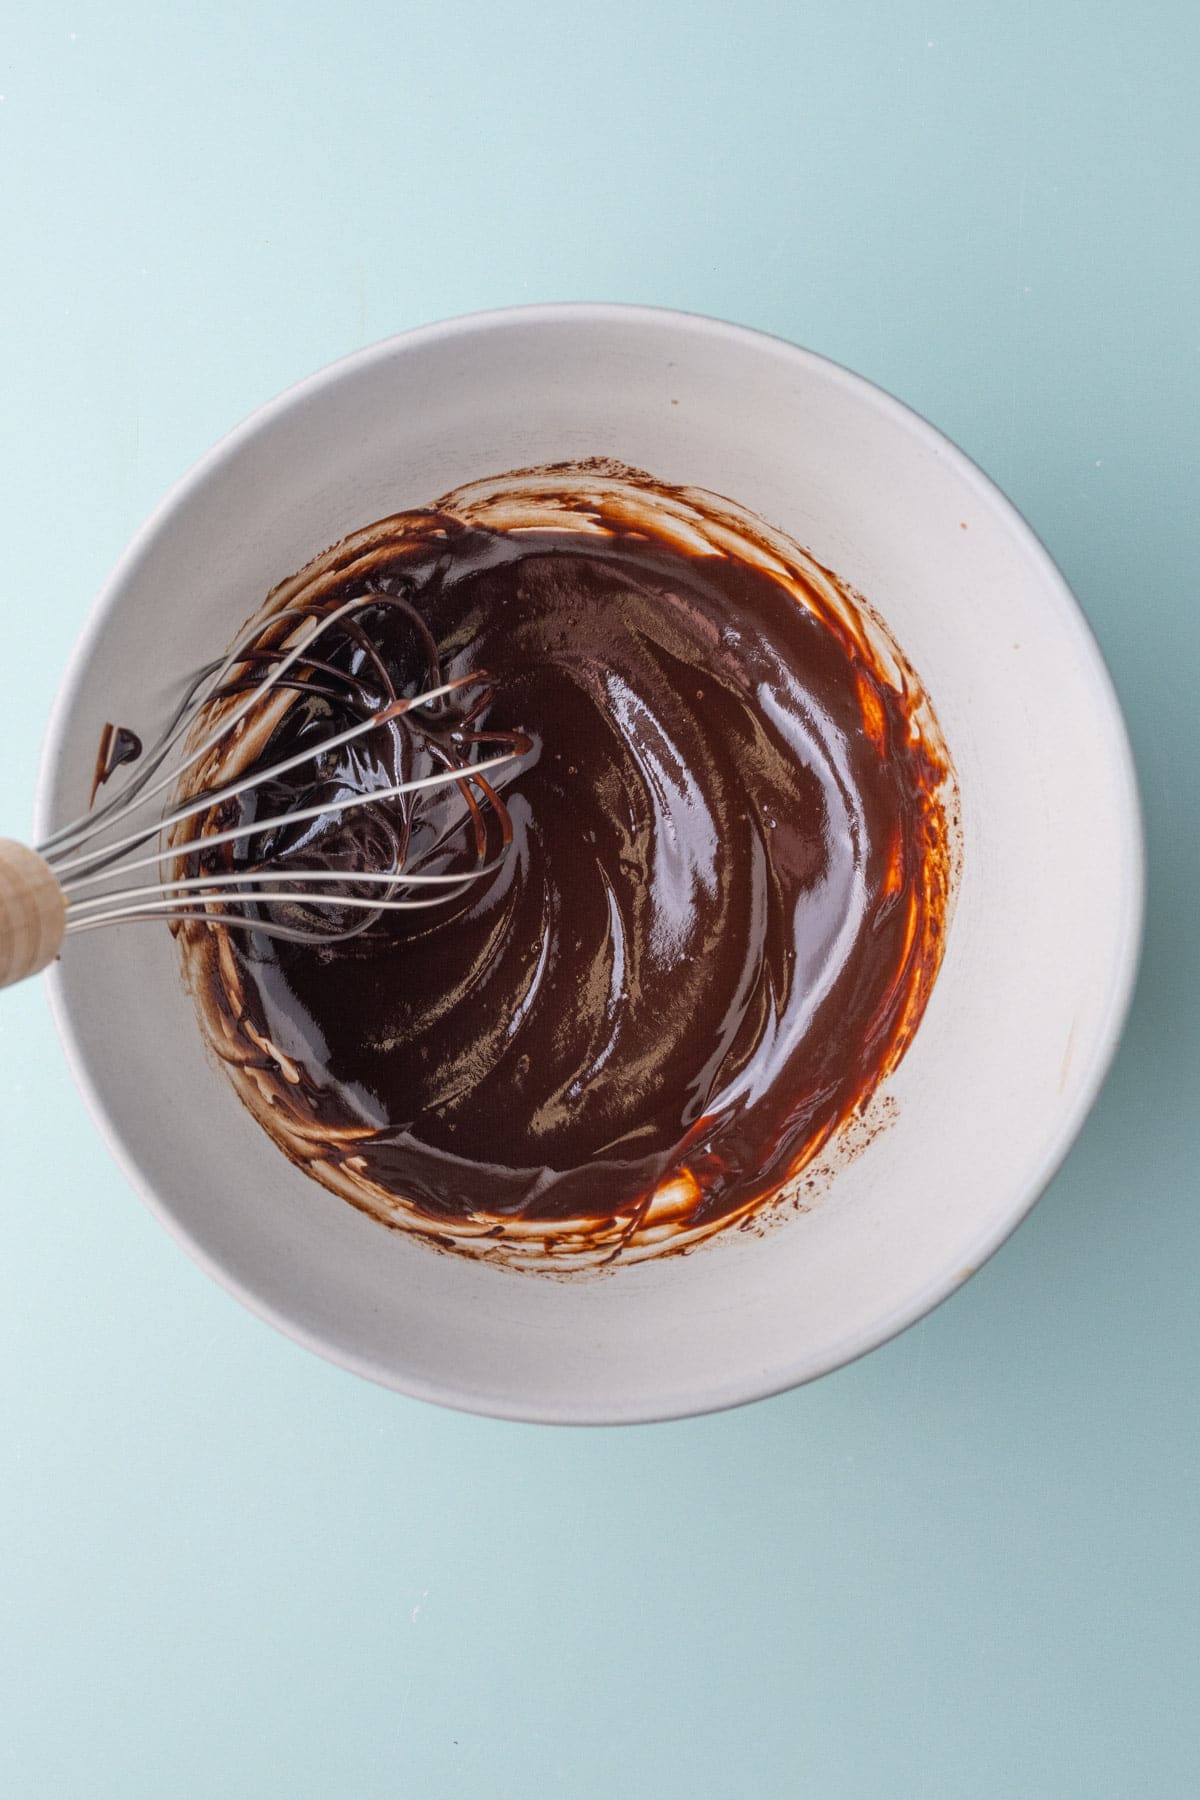 Melted chocolate fudge sauce made from chocolate chips, butter, and milk, whisked together after 30 seconds in the microwave.